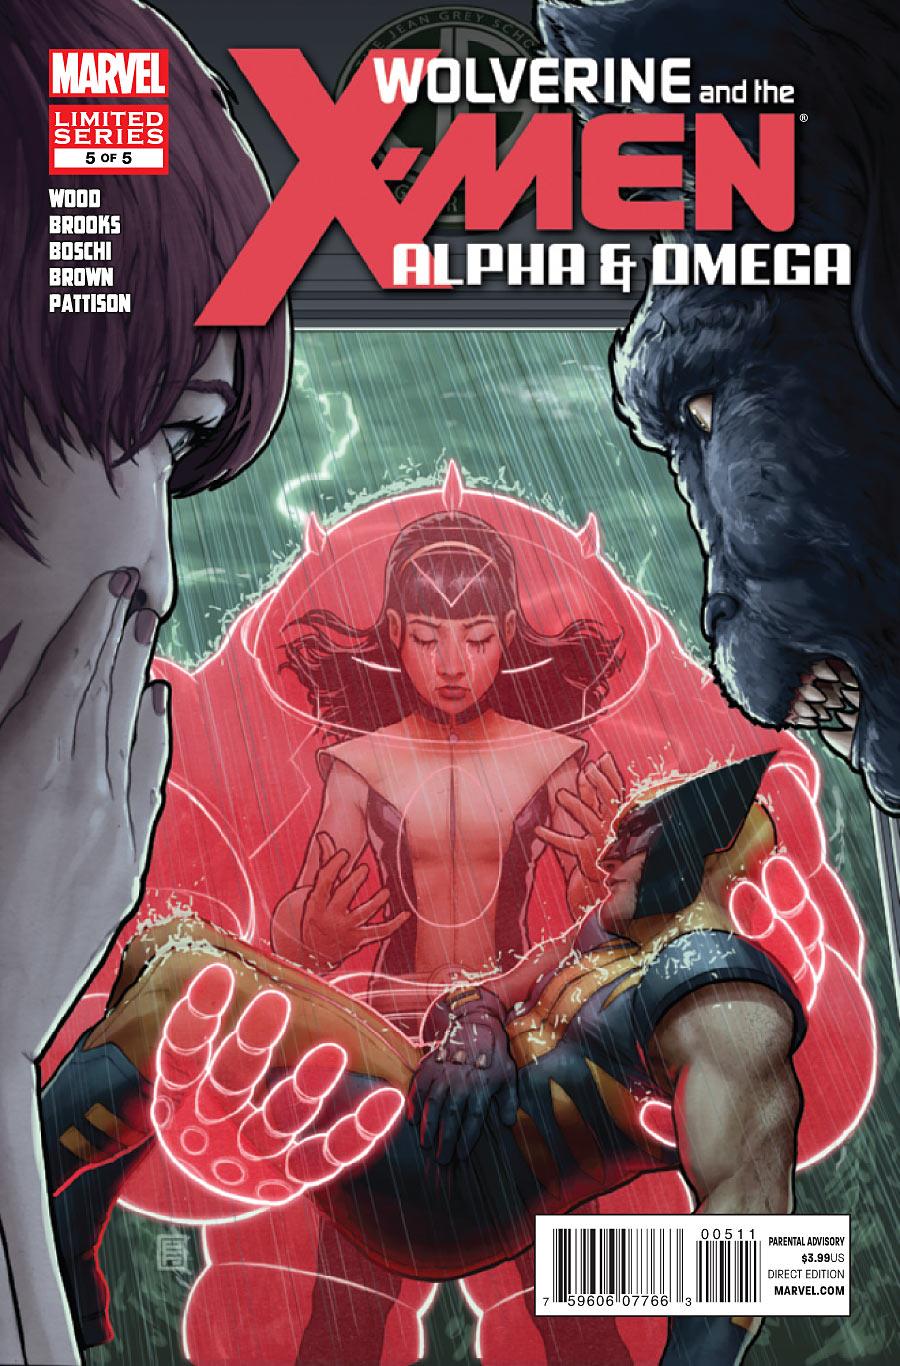 Wolverine and the X-Men: Alpha & Omega Vol. 1 #5